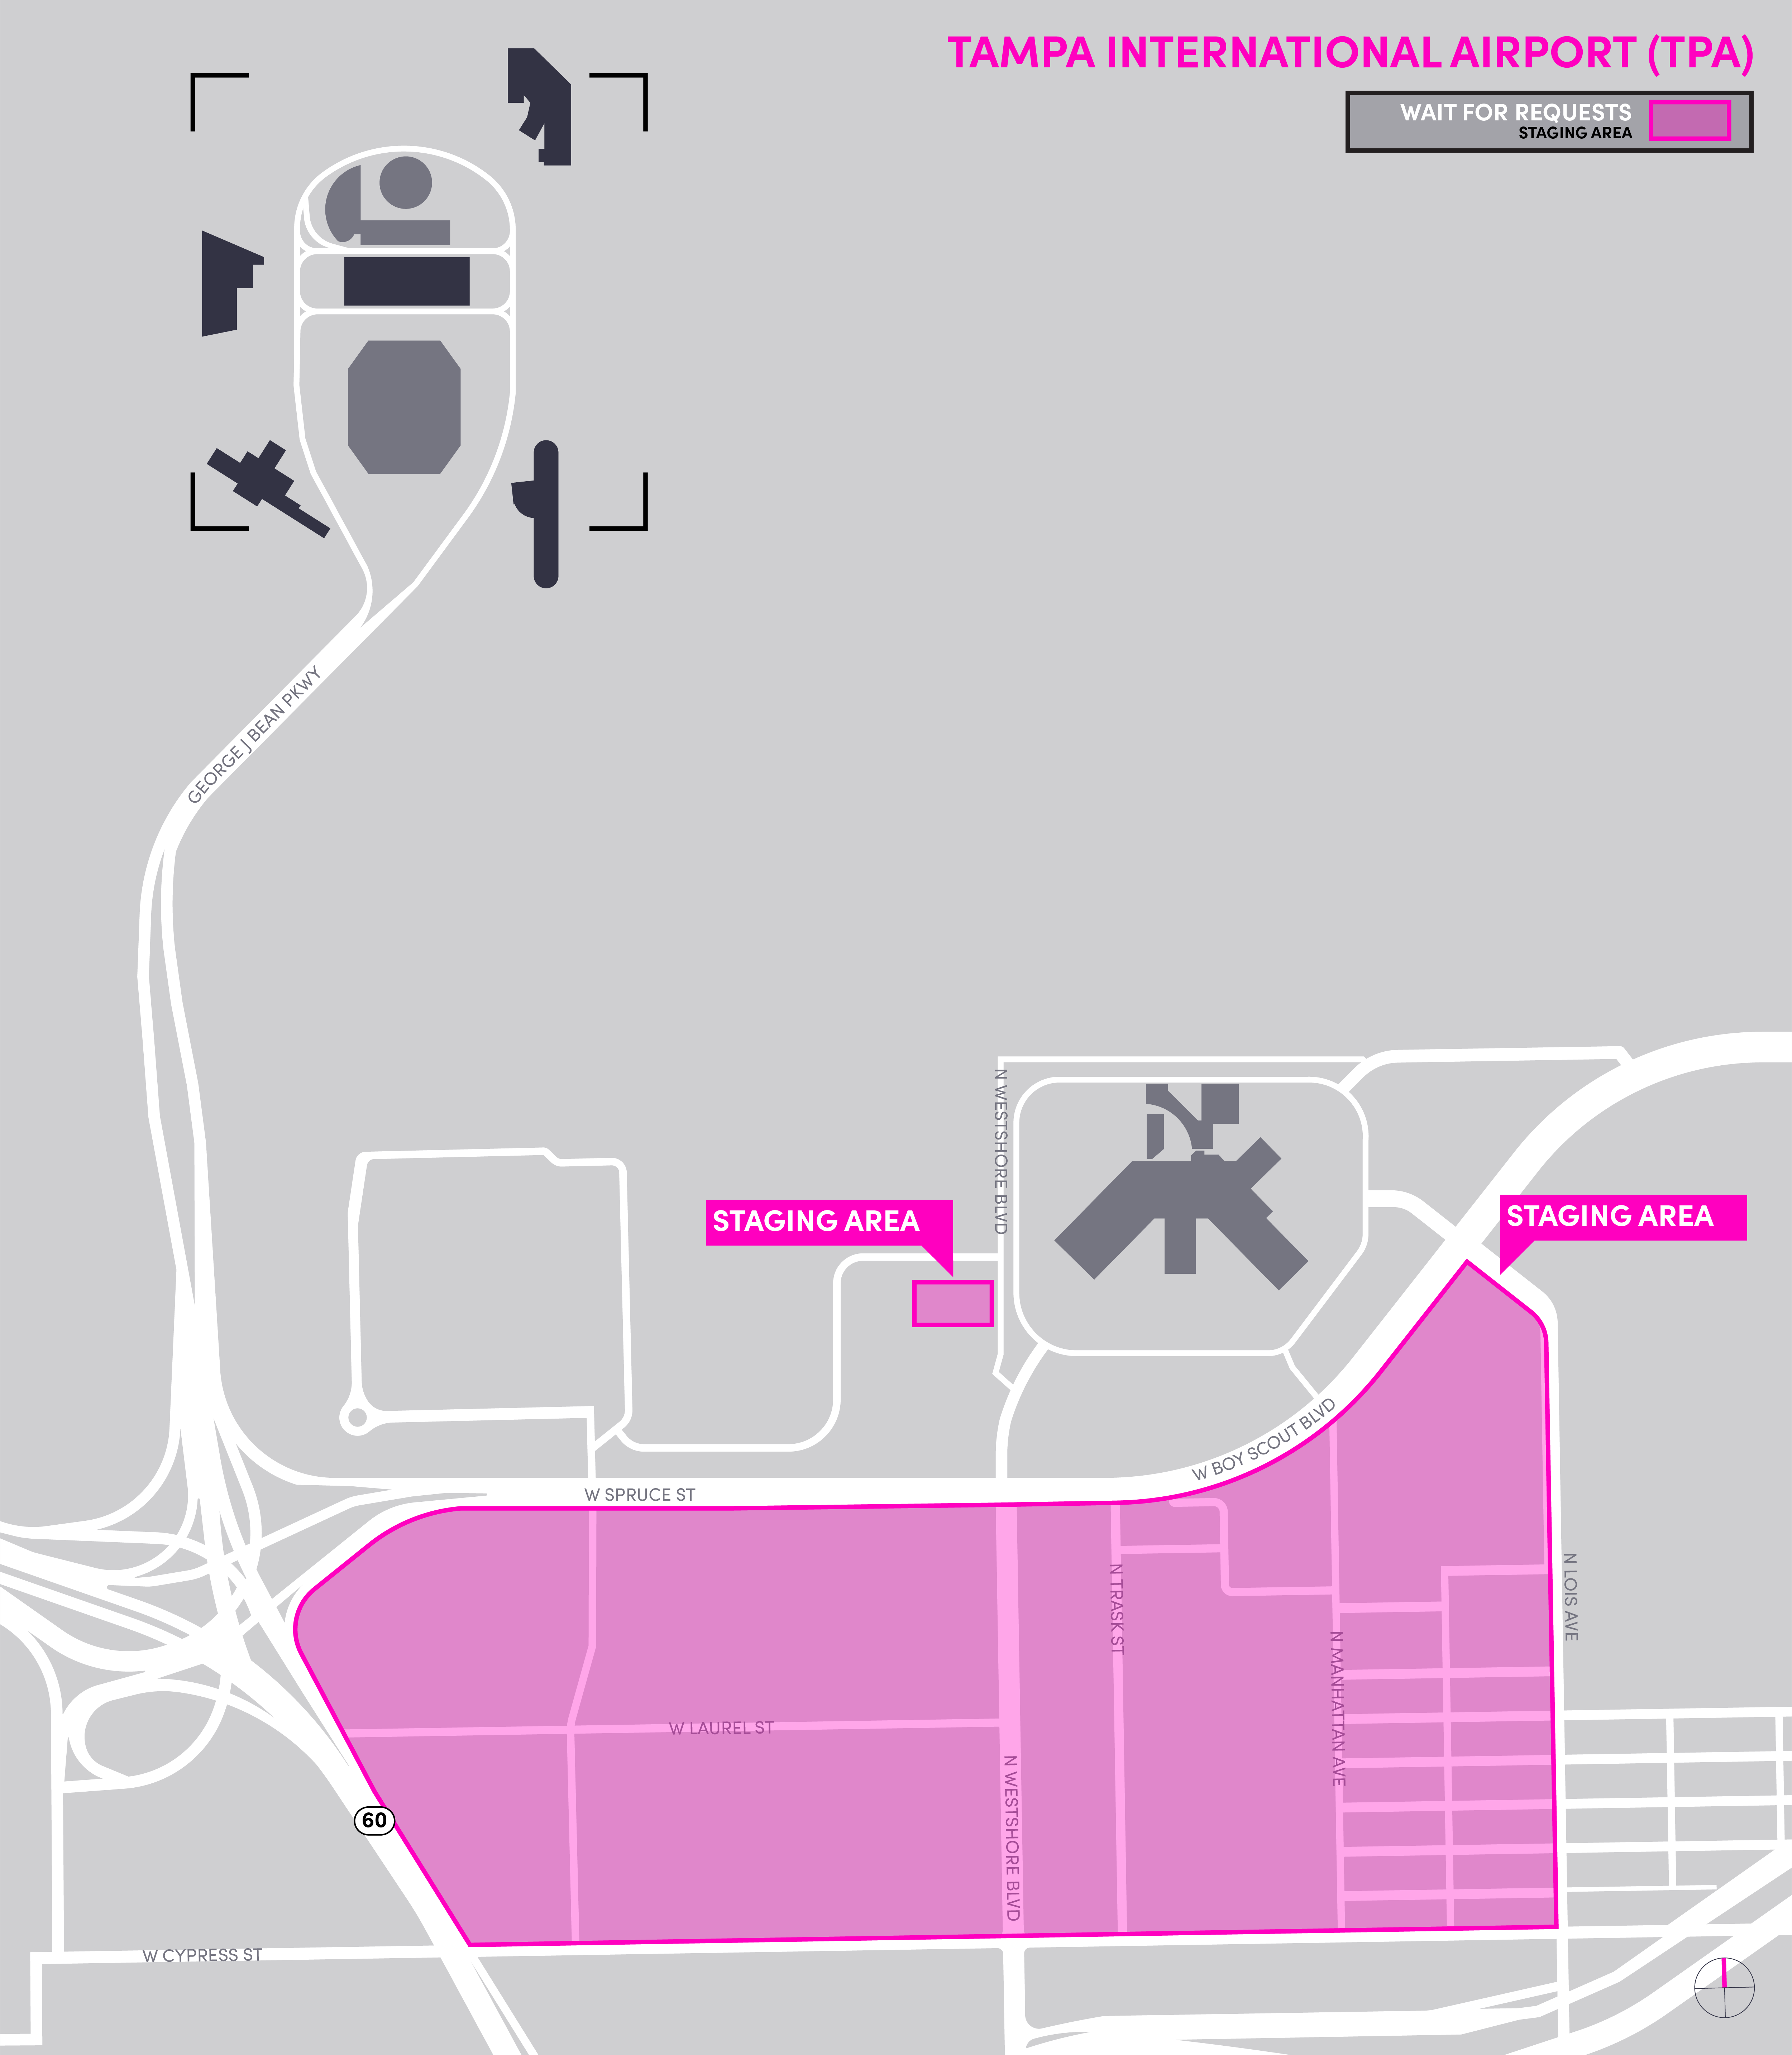 This image is a map of the TPA airport including staging area. It includes staging lot, pickup, and drop-off areas.